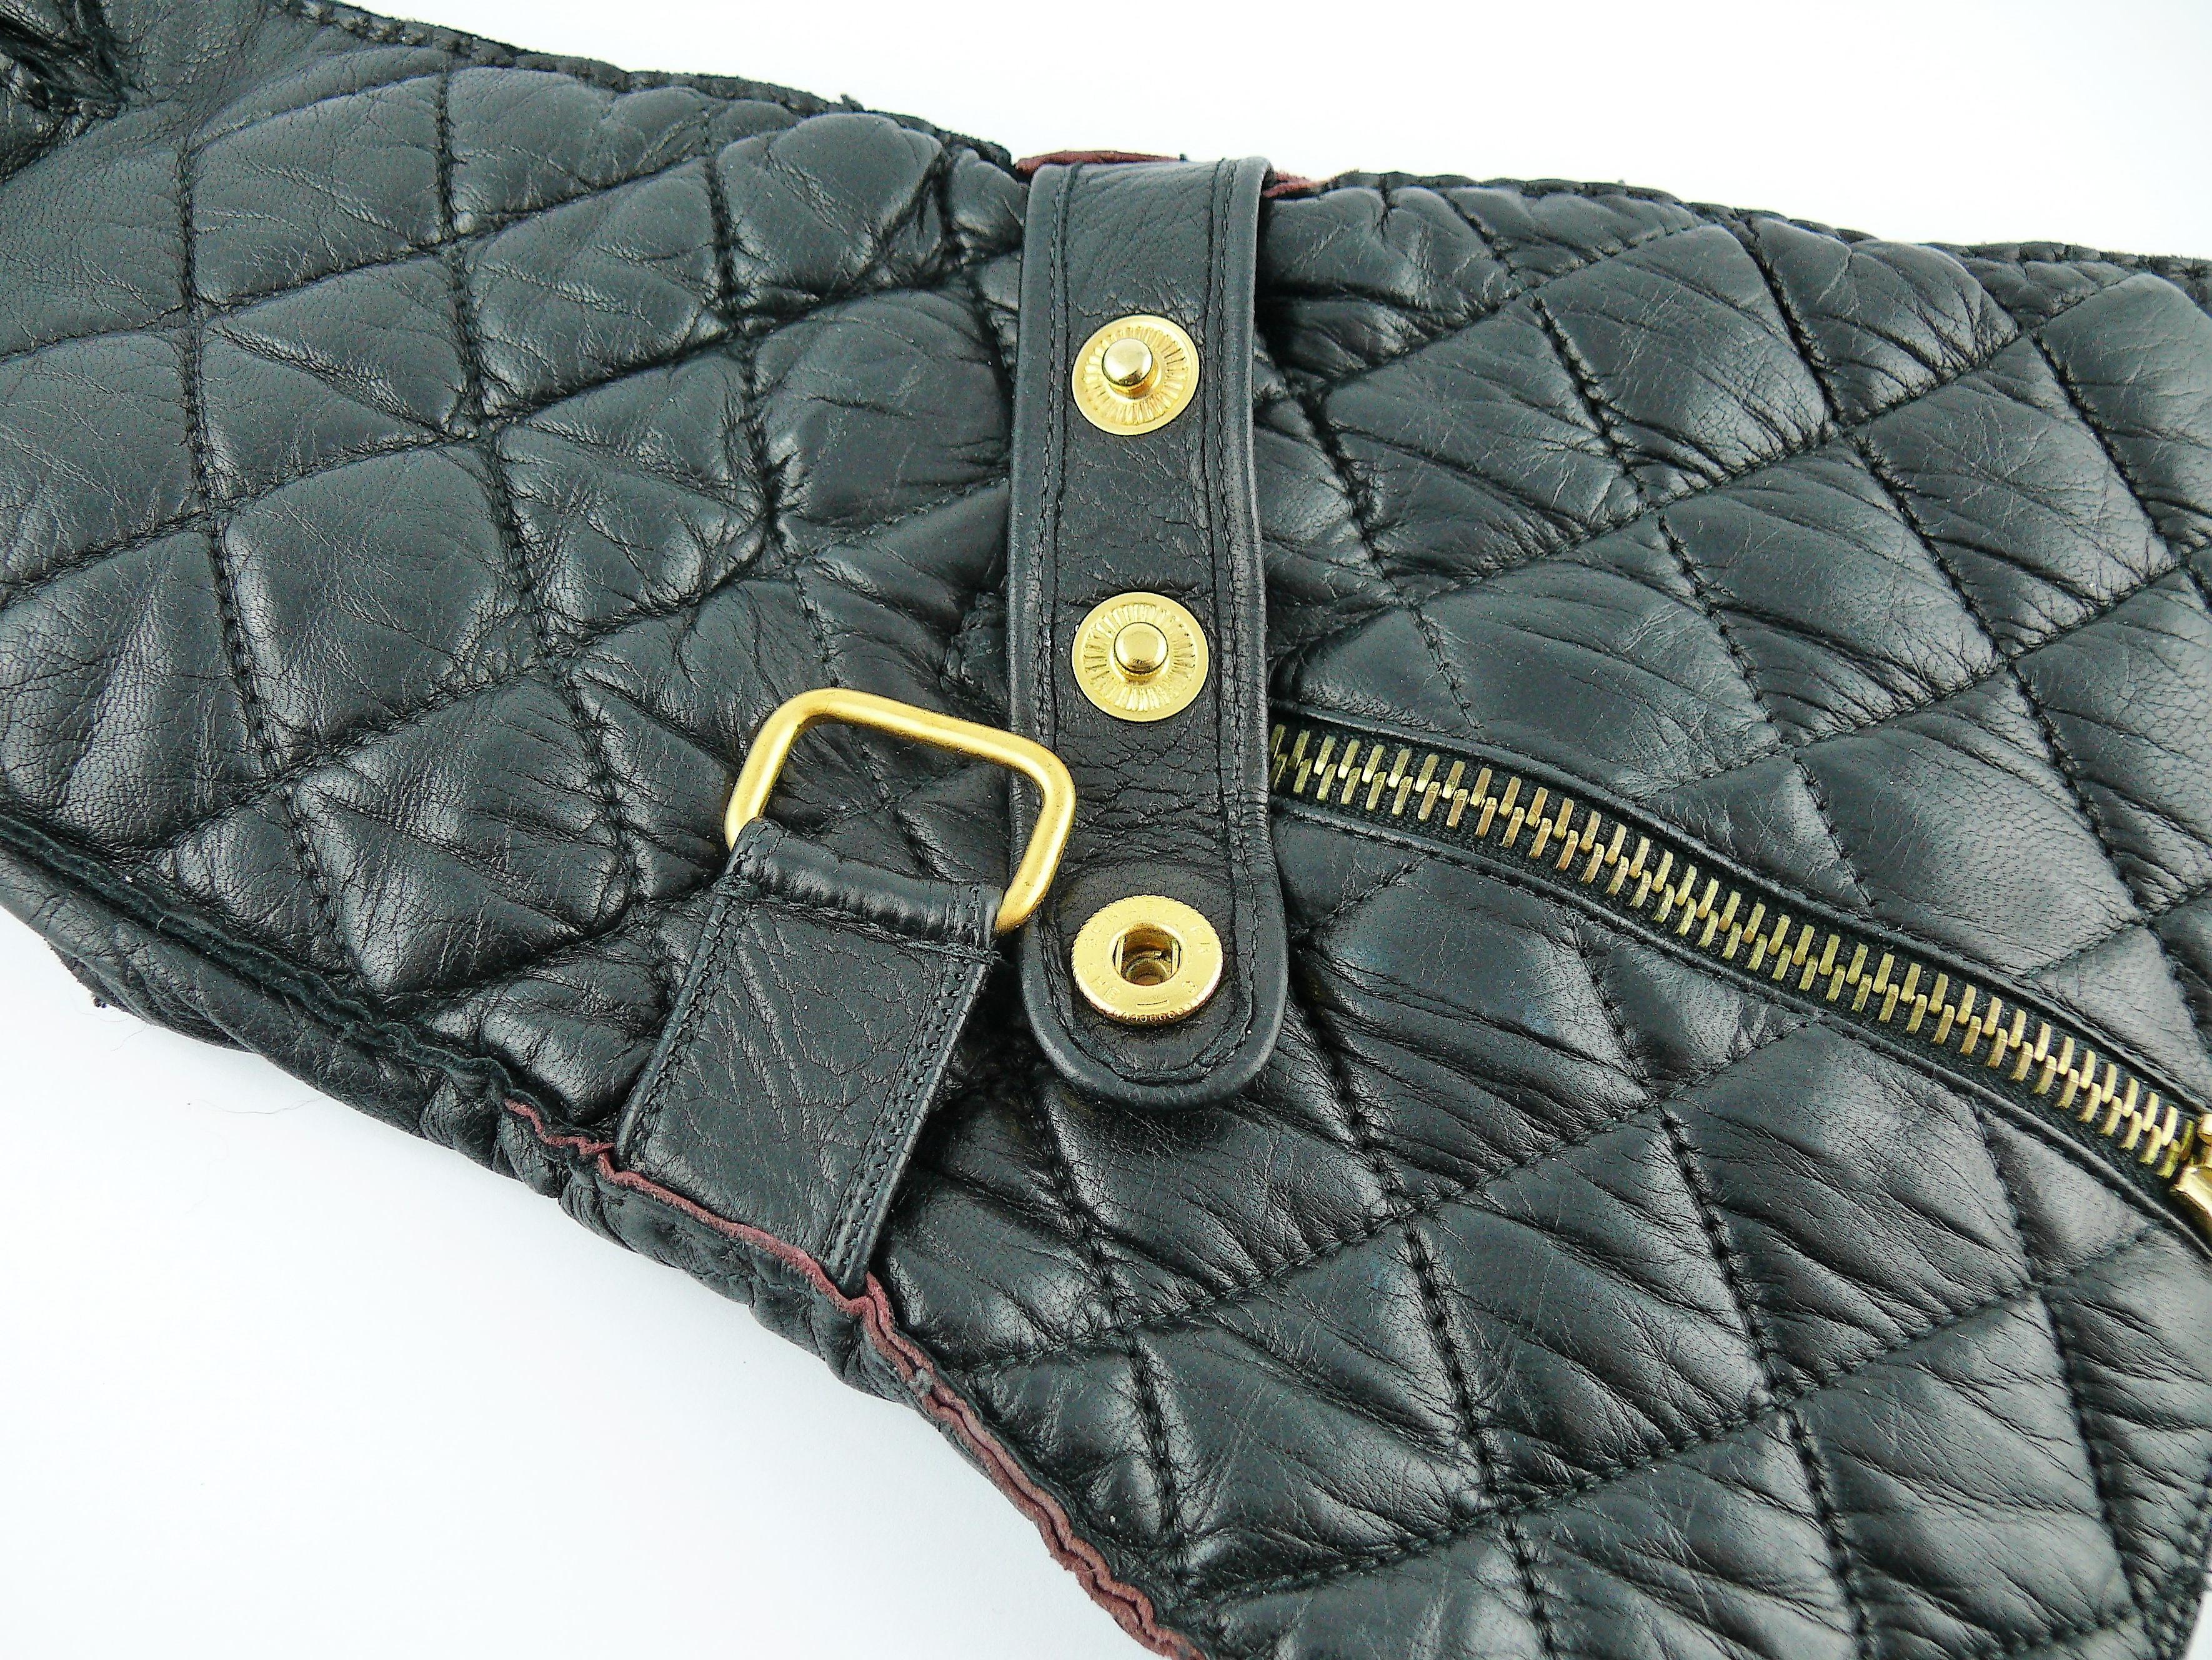 Chanel Vintage Iconic Black Quilted Kidskin Leather Rue Cambon Gloves Size 7 1/2 For Sale 2